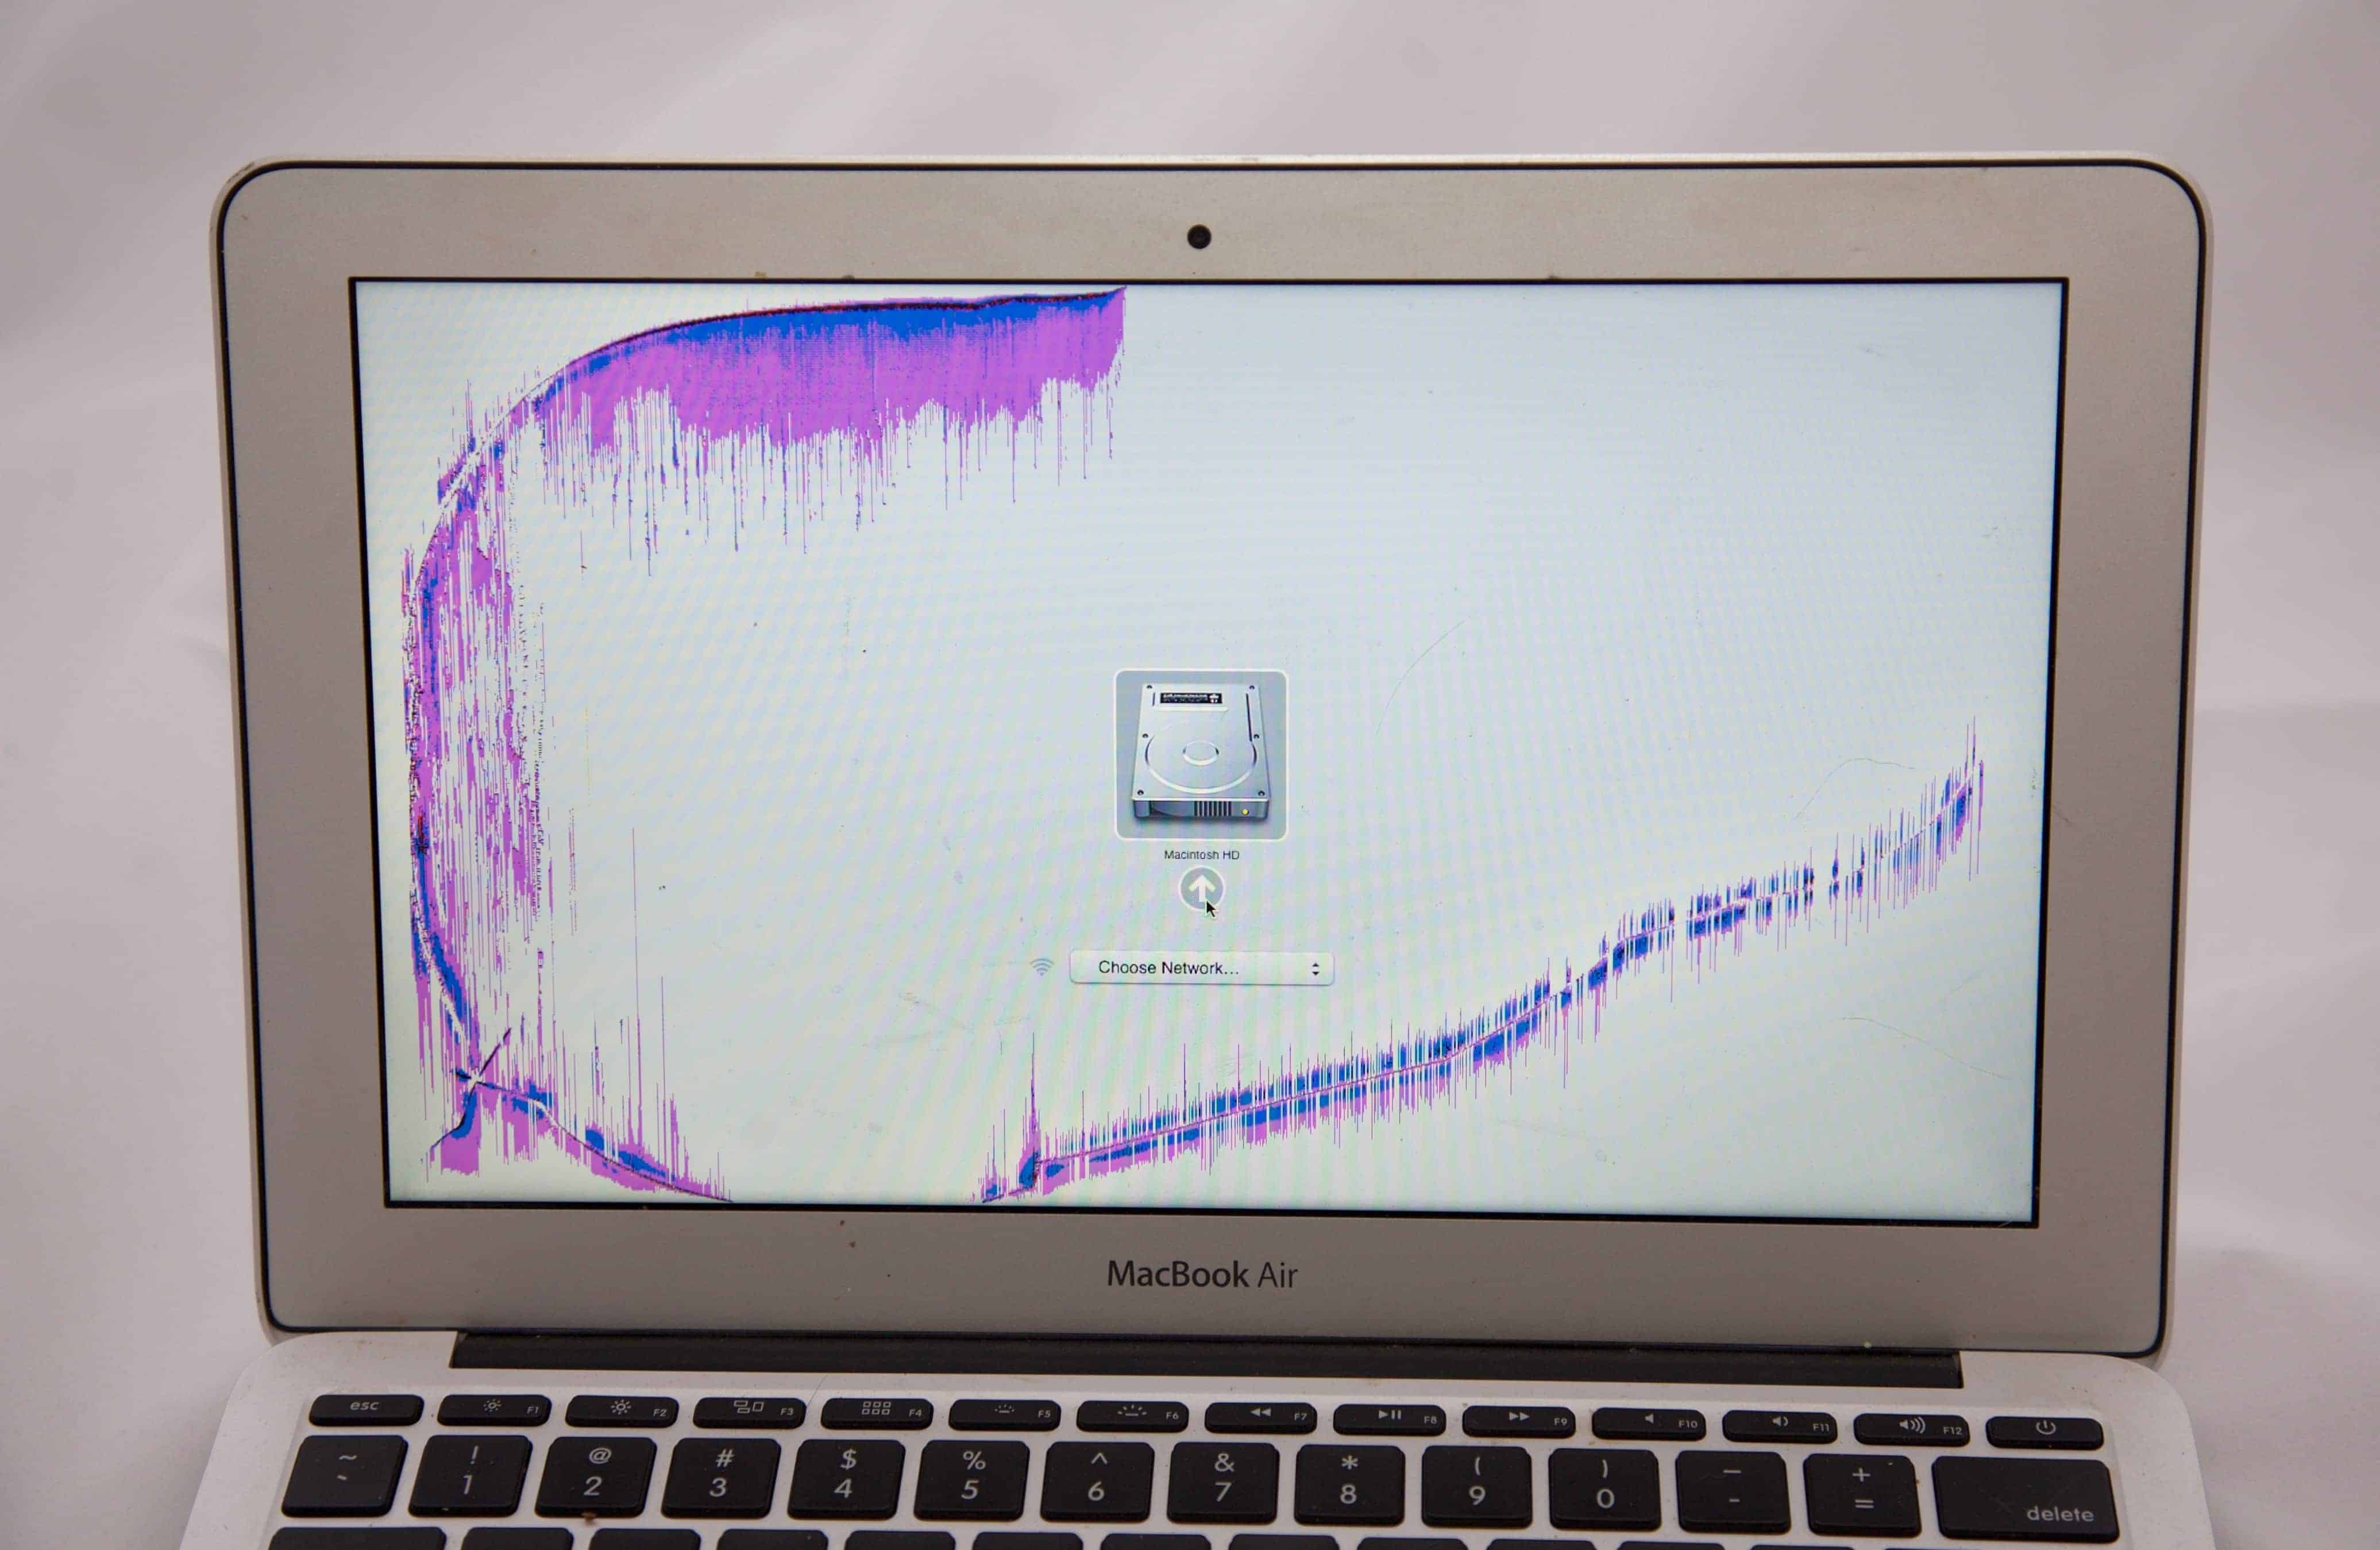 MacBook Air 11" with pink and blue discoloration around crack.